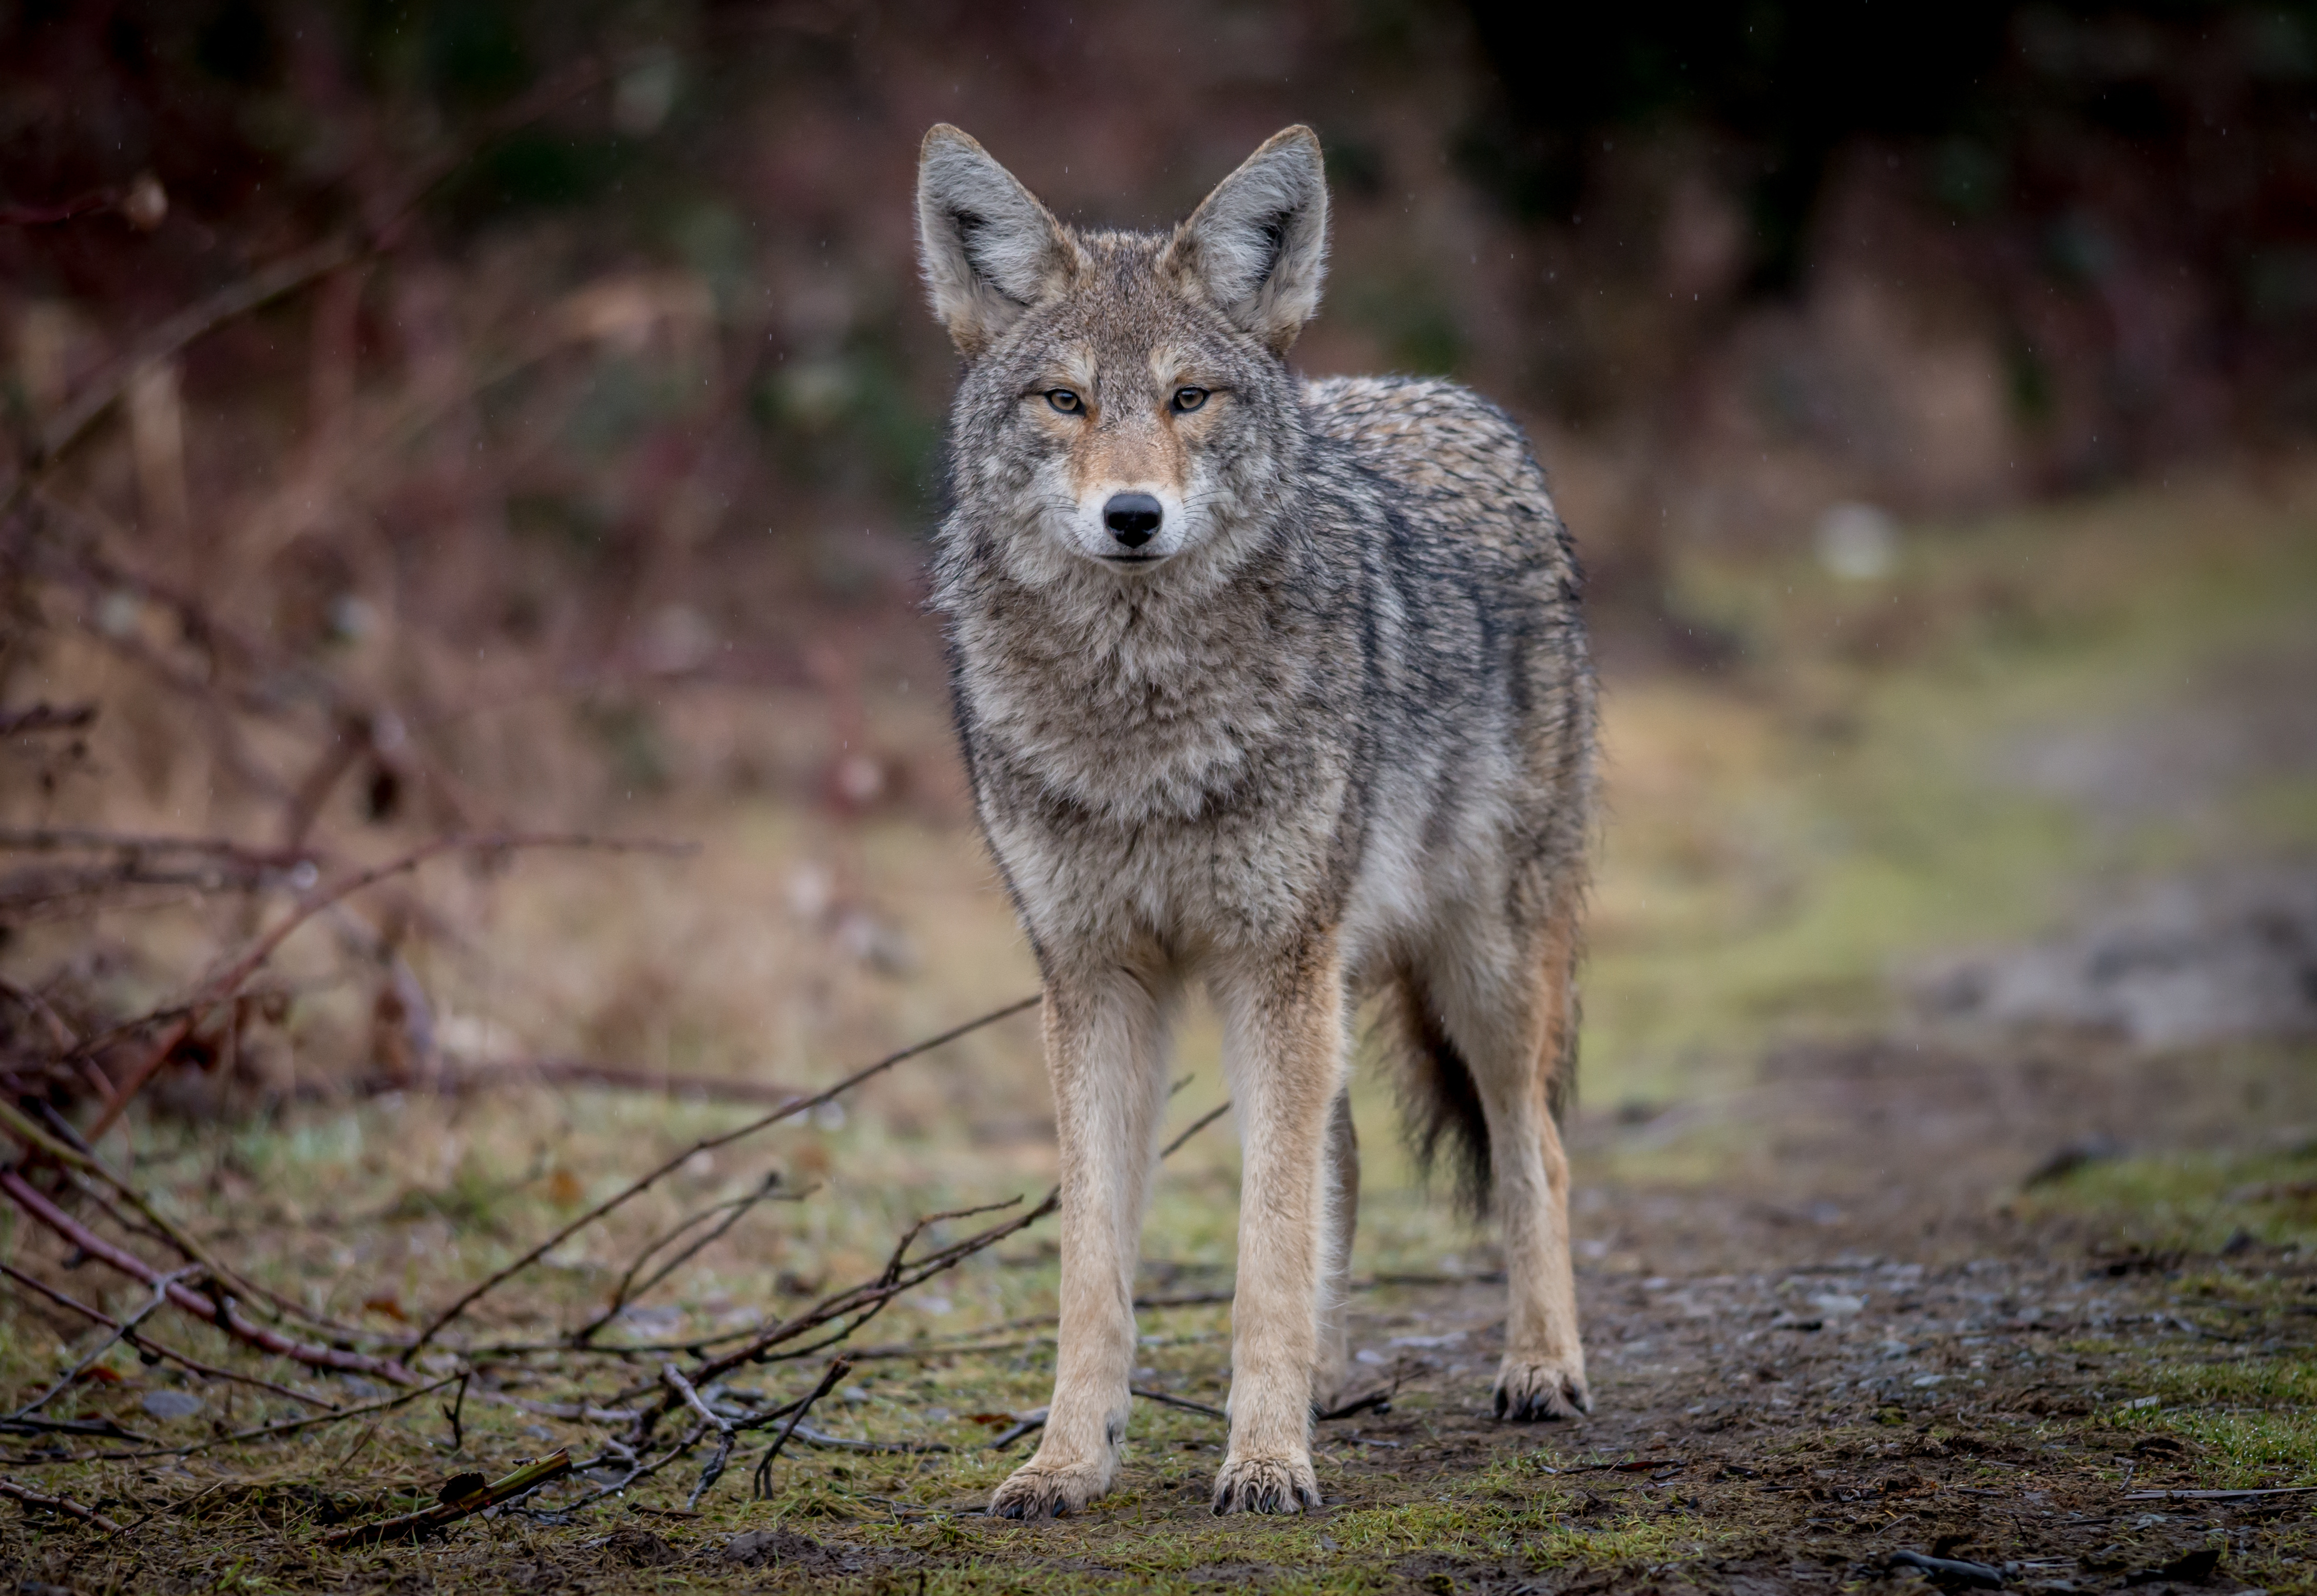 Wildlife experts investigating increase in coyote sightings near ...